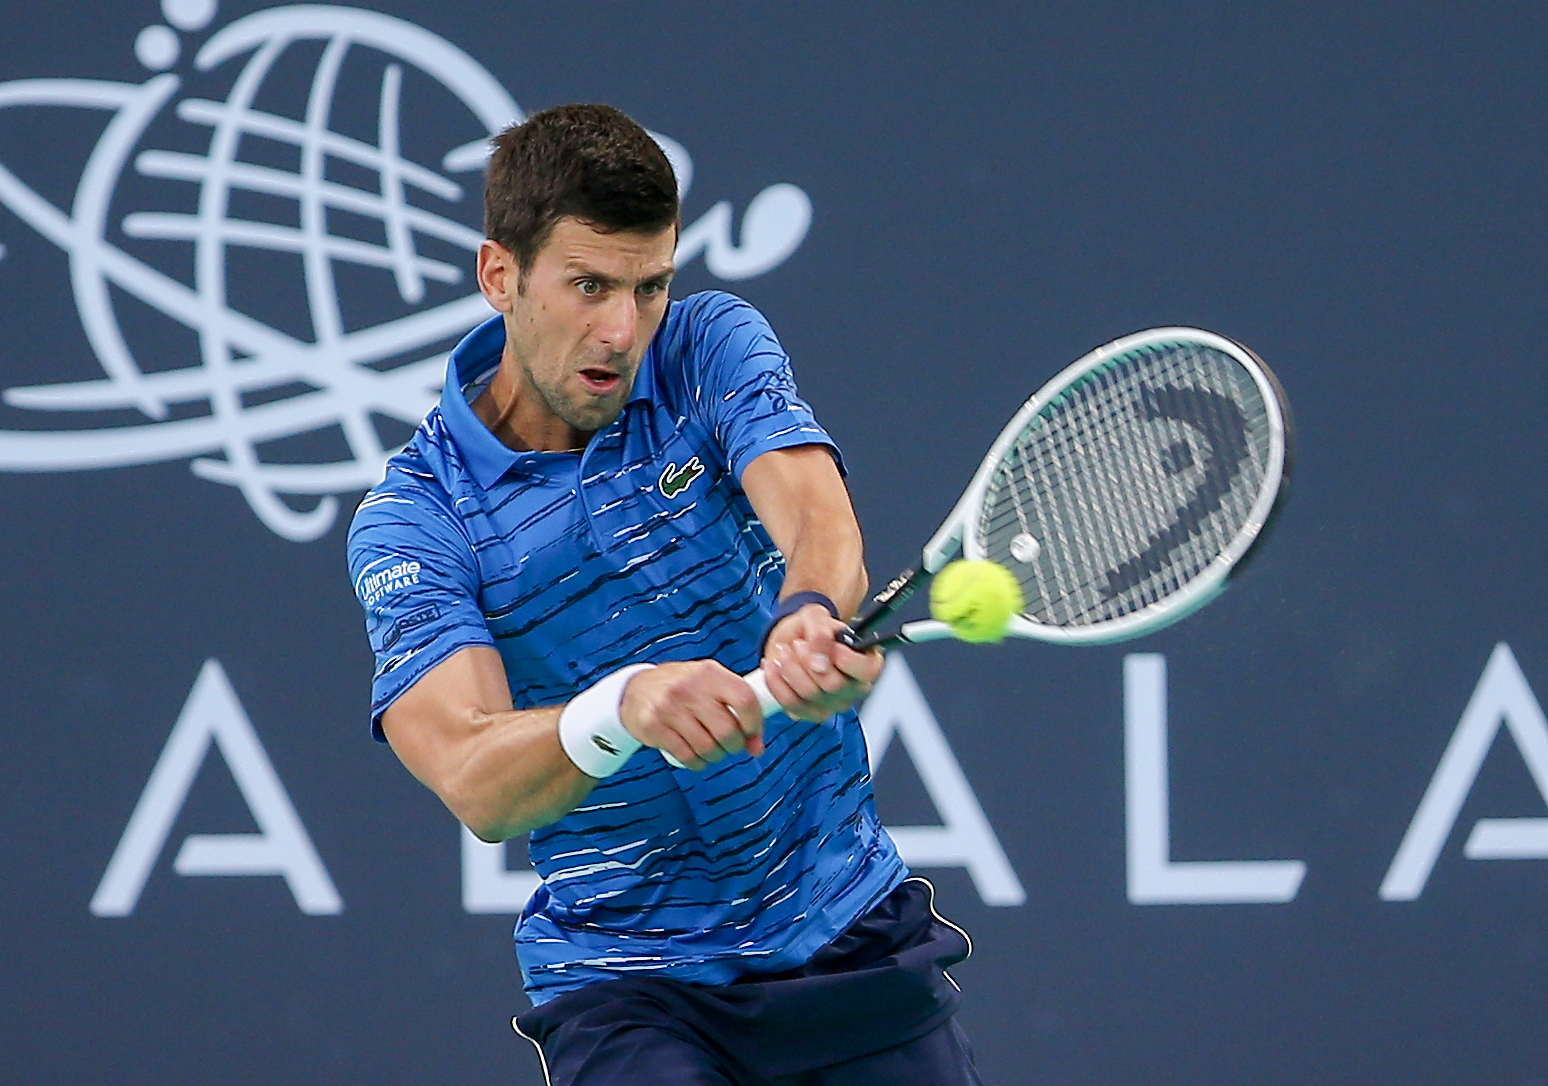 Djokovic to play at US Open